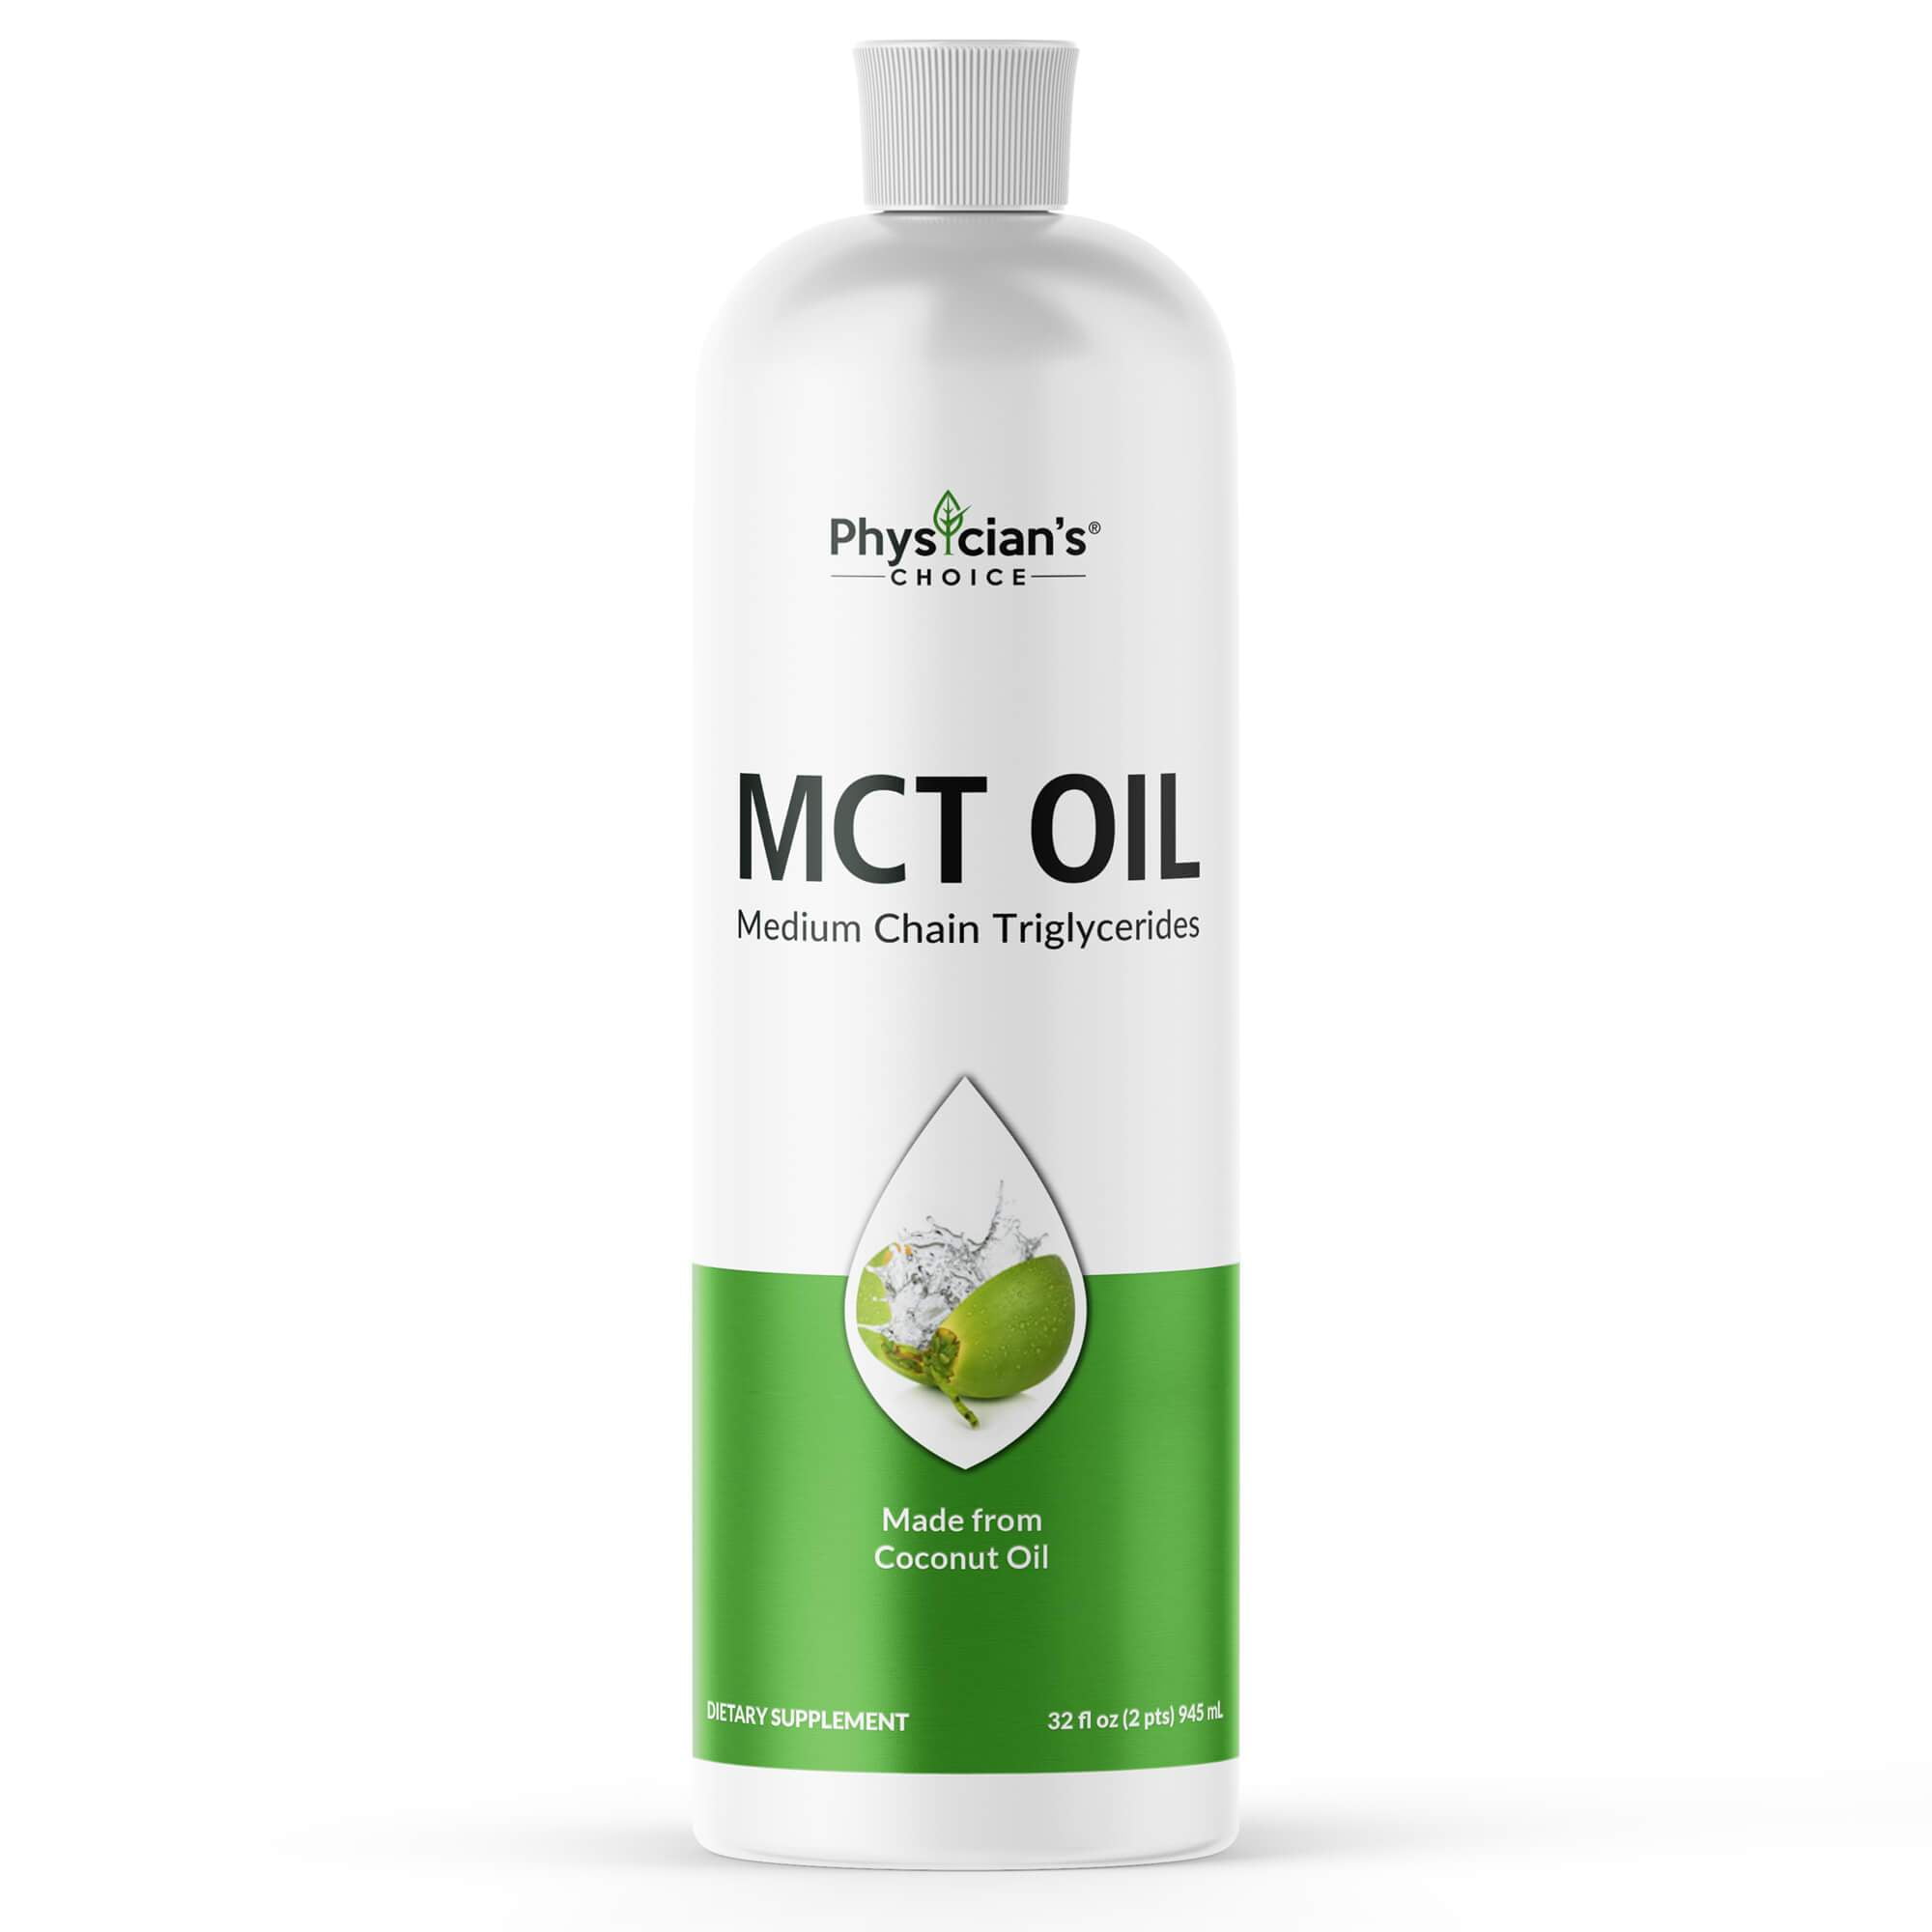 Physician's Choice, MCT Oil from Coconut Oil, 32 oz